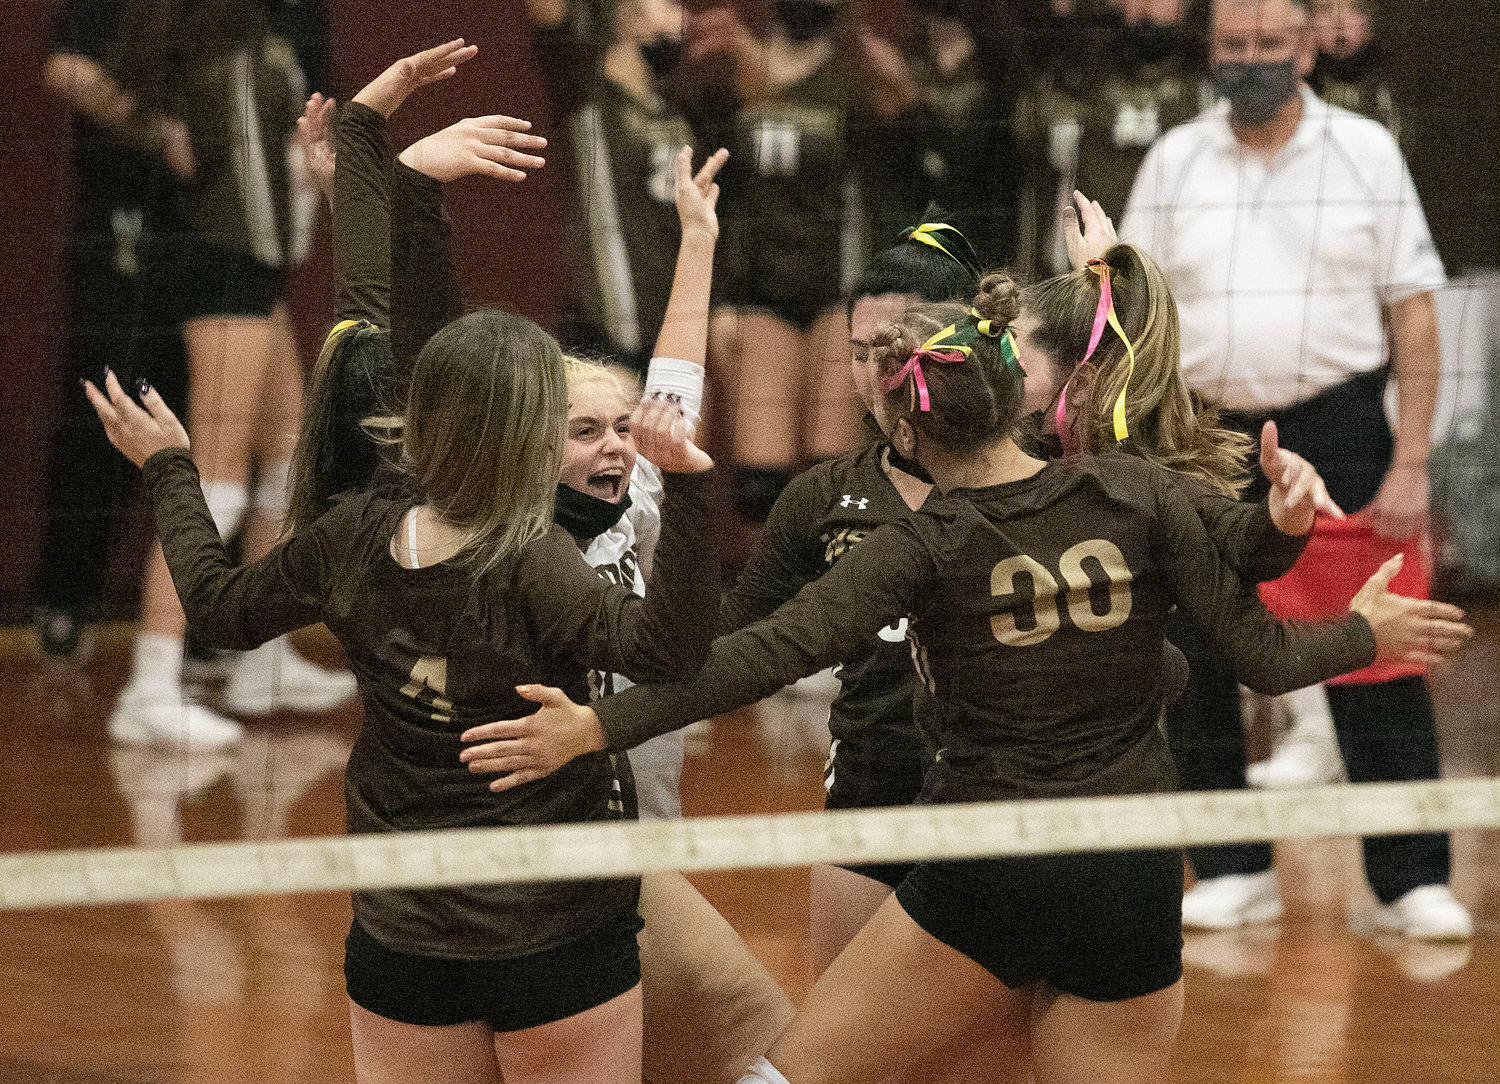 Paige Churchill (left) leads the cheer after a Wildcats ace.